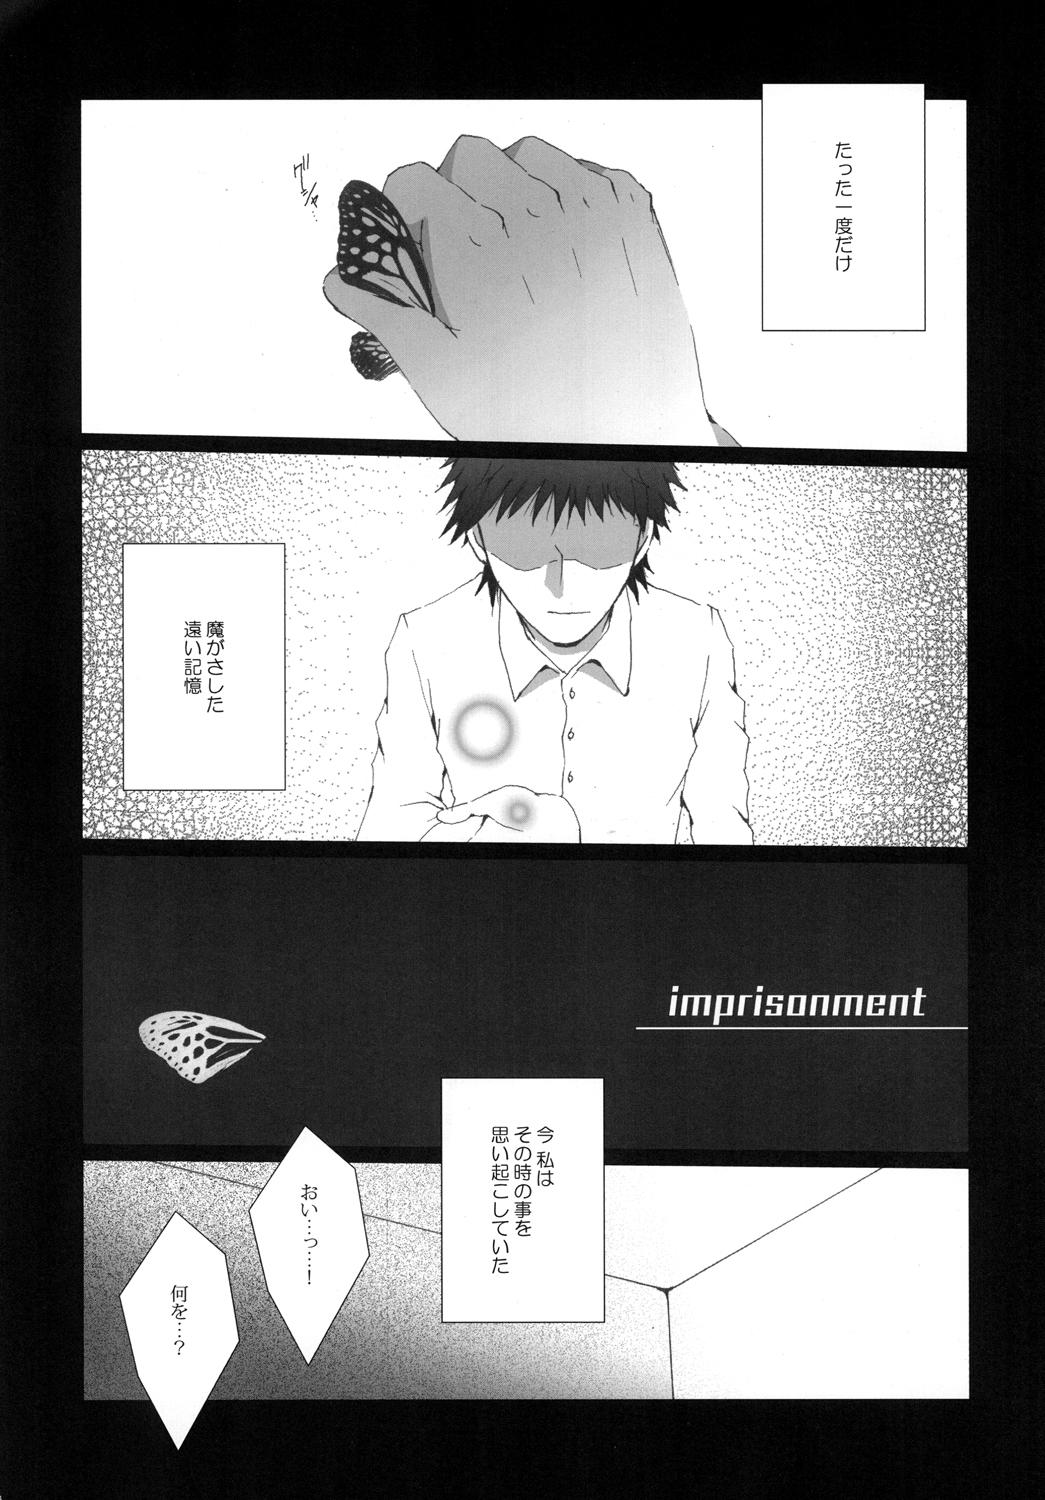 With Imprisonment - Fate zero Holes - Page 5